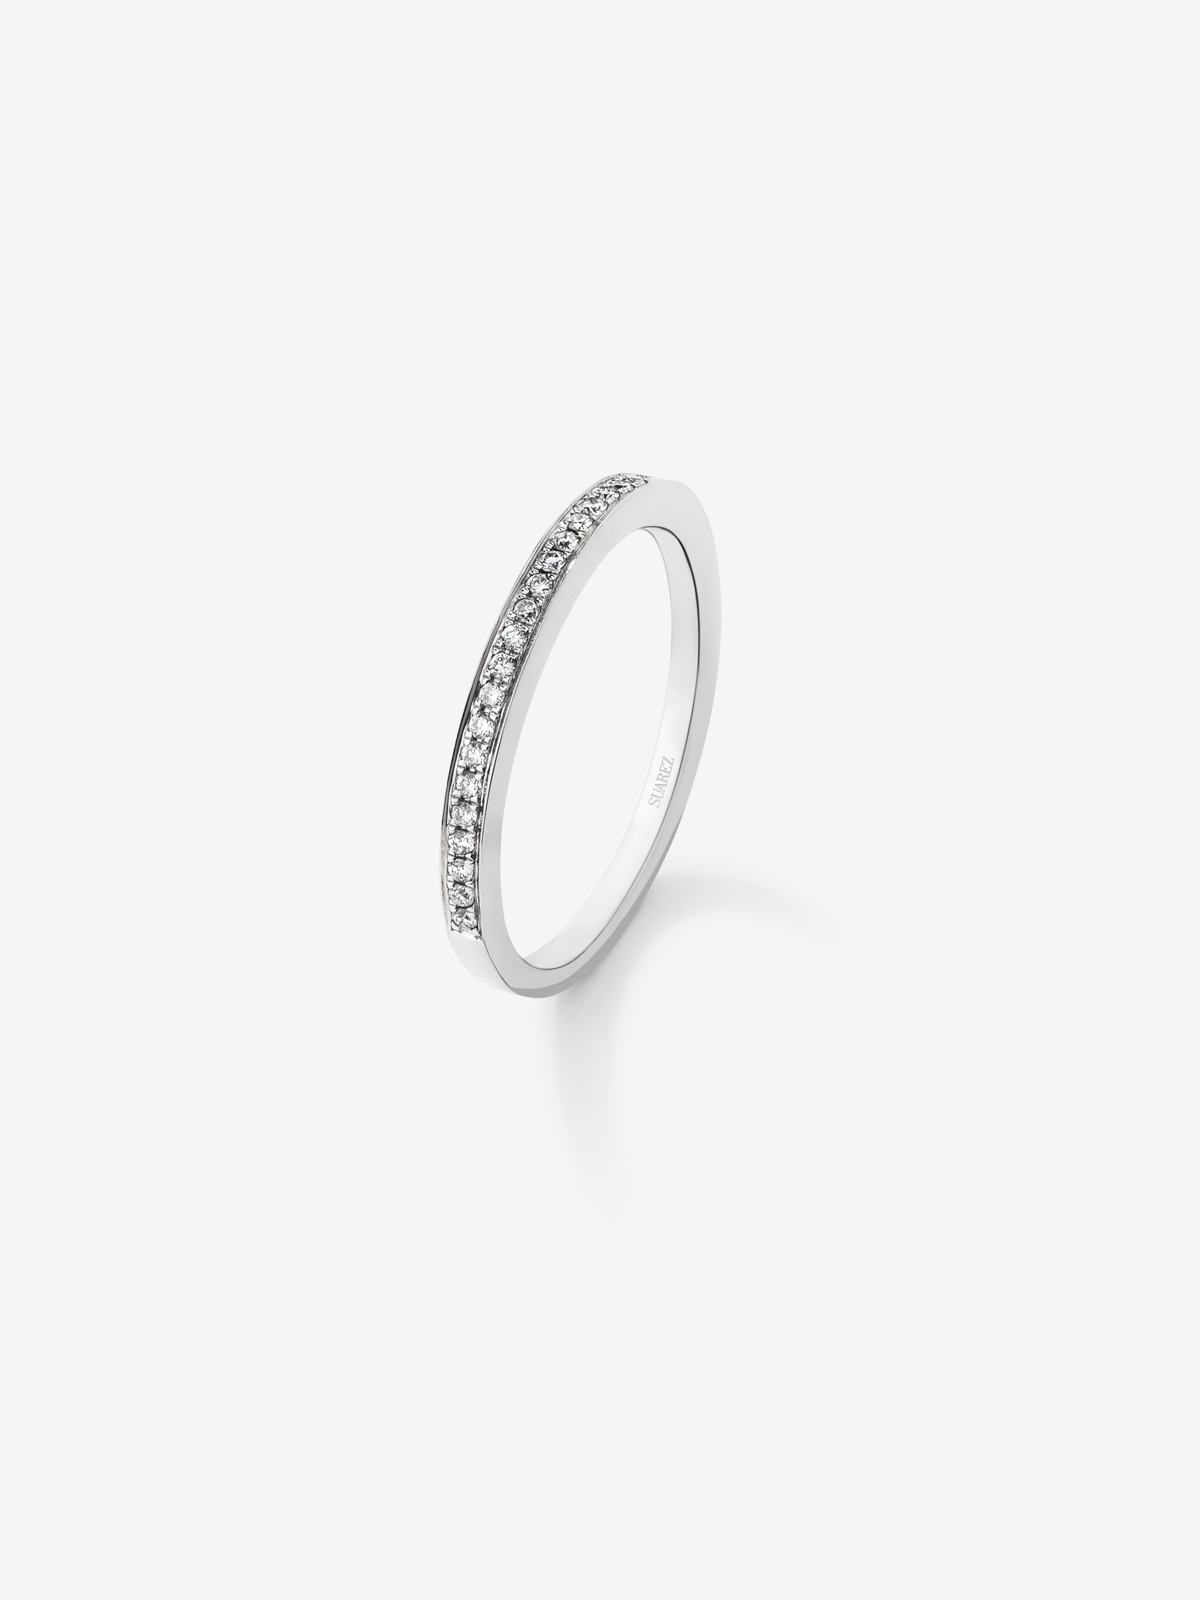 Half-band engagement ring in 18K white gold with diamonds on the band 0.12ct.